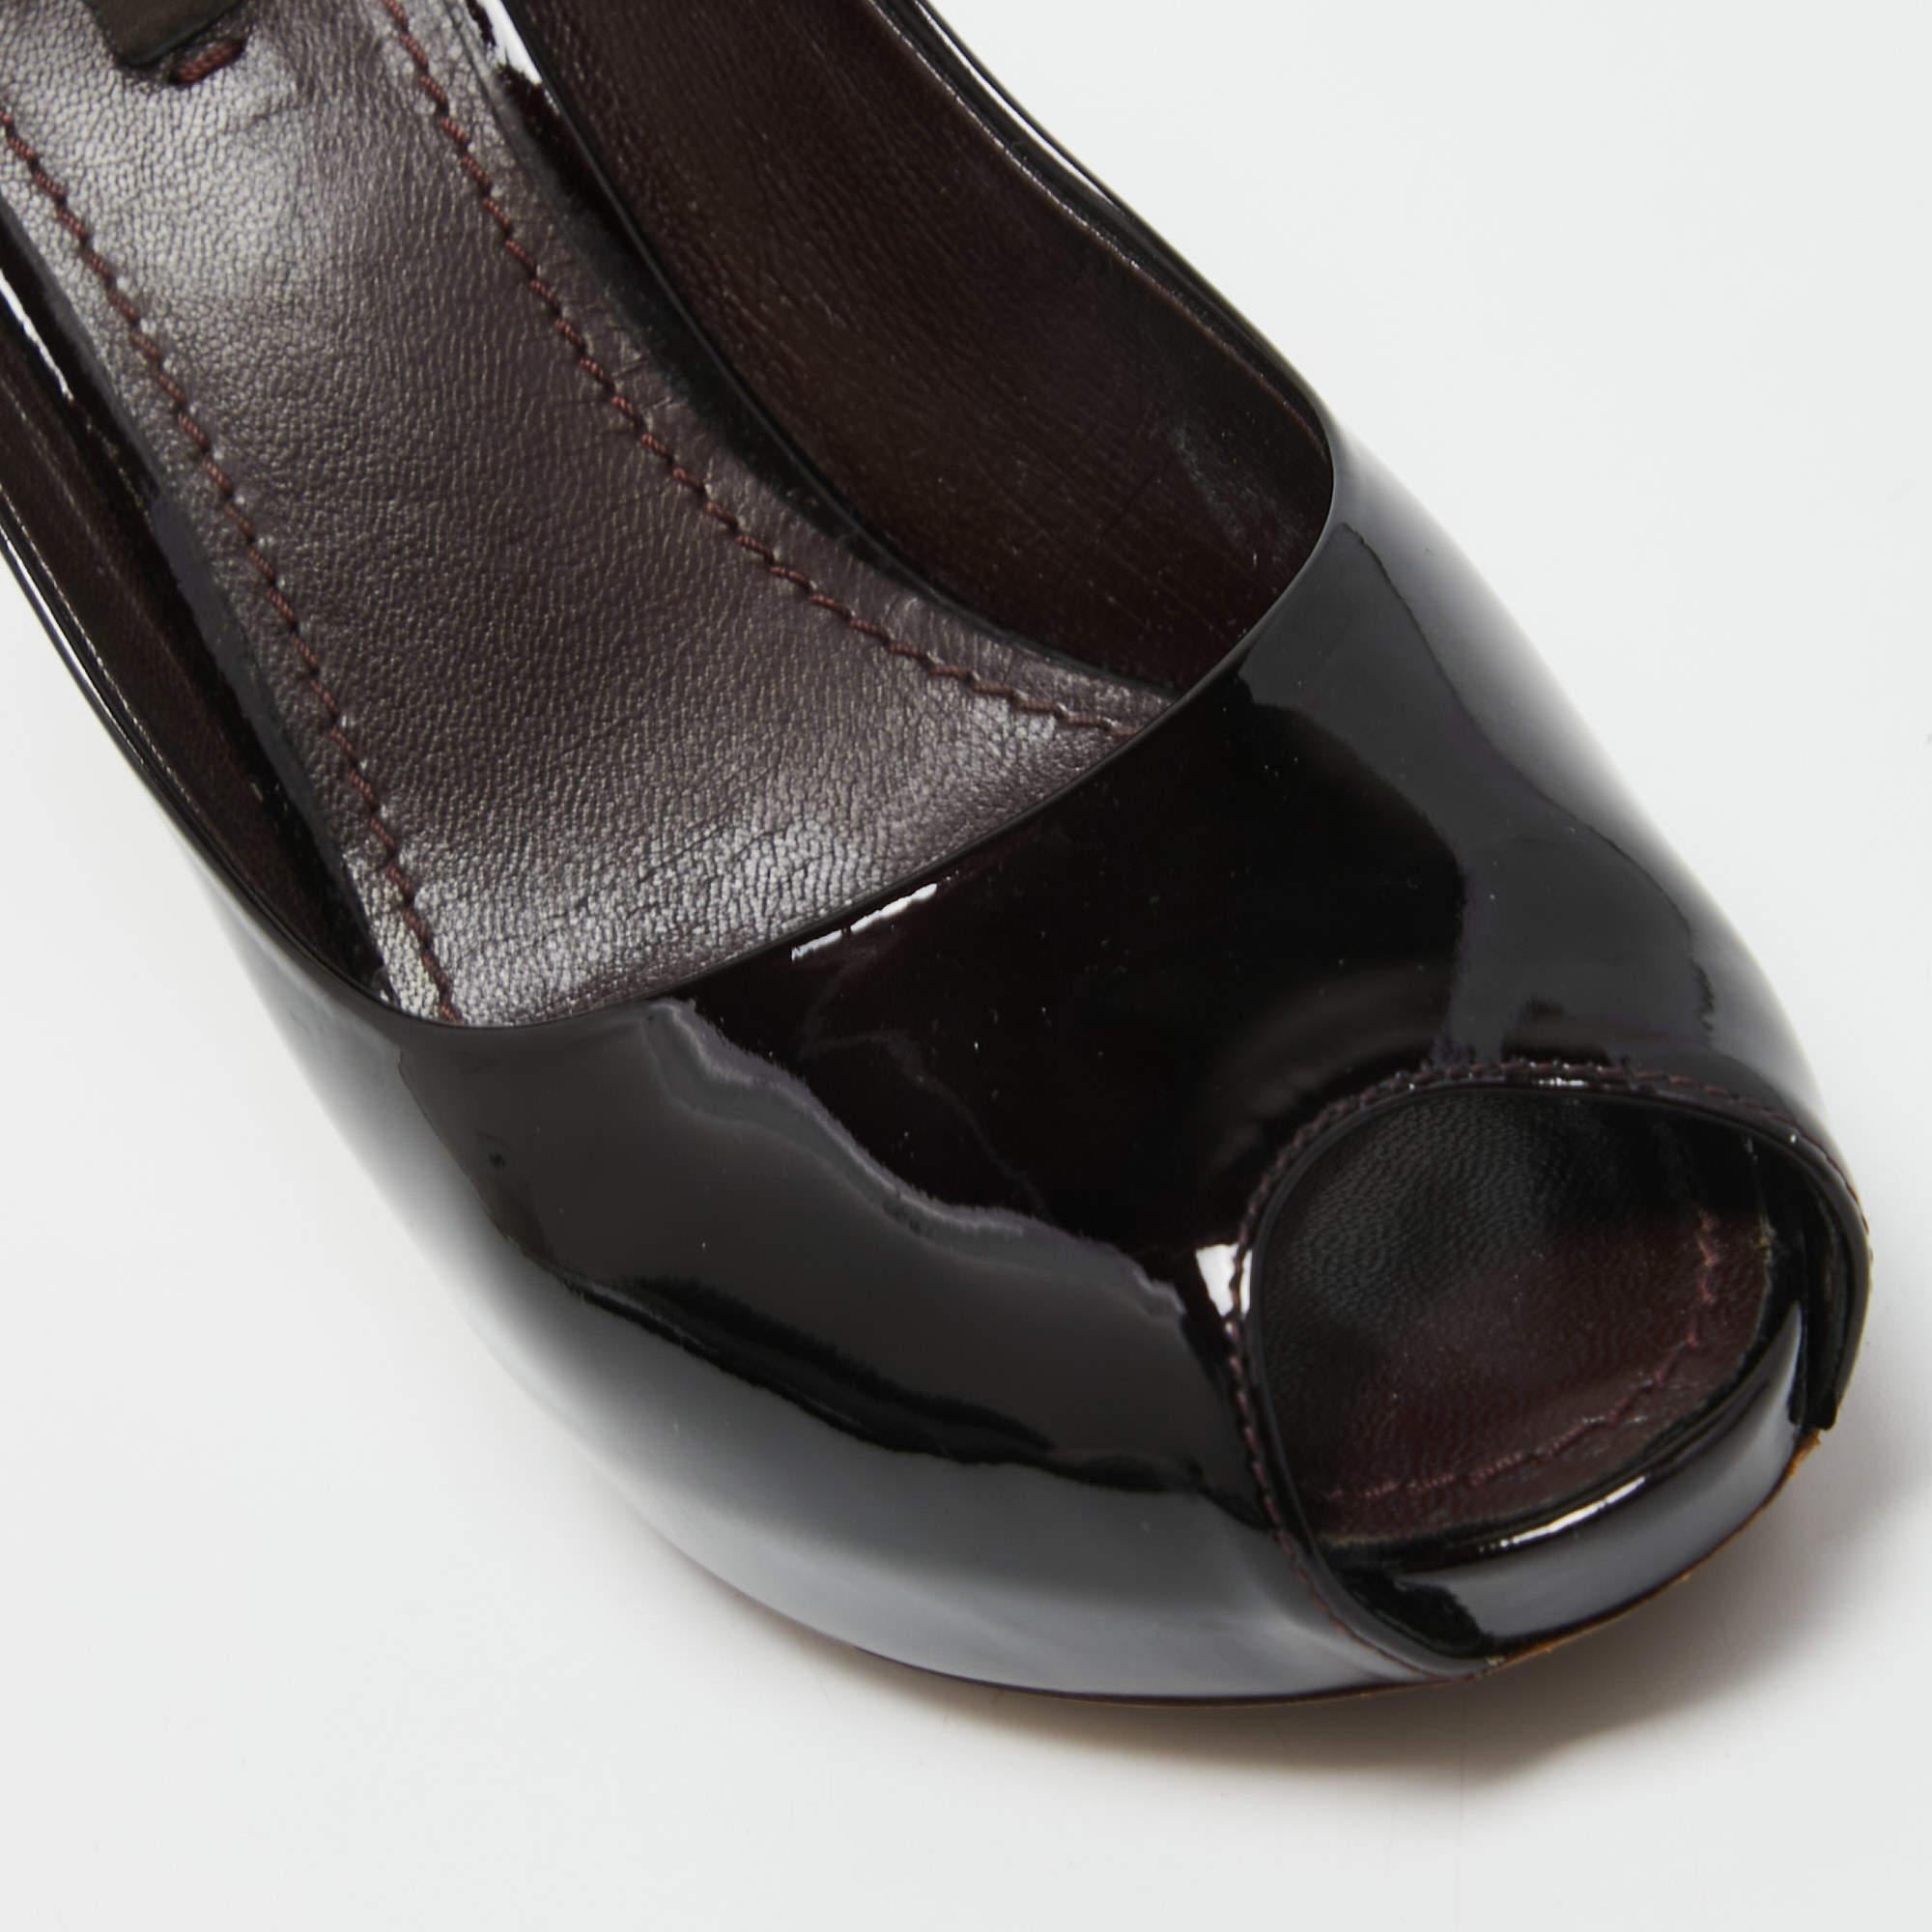 Louis Vuitton Burgundy Patent Leather Oh Really! Pumps Size 38 For Sale 2